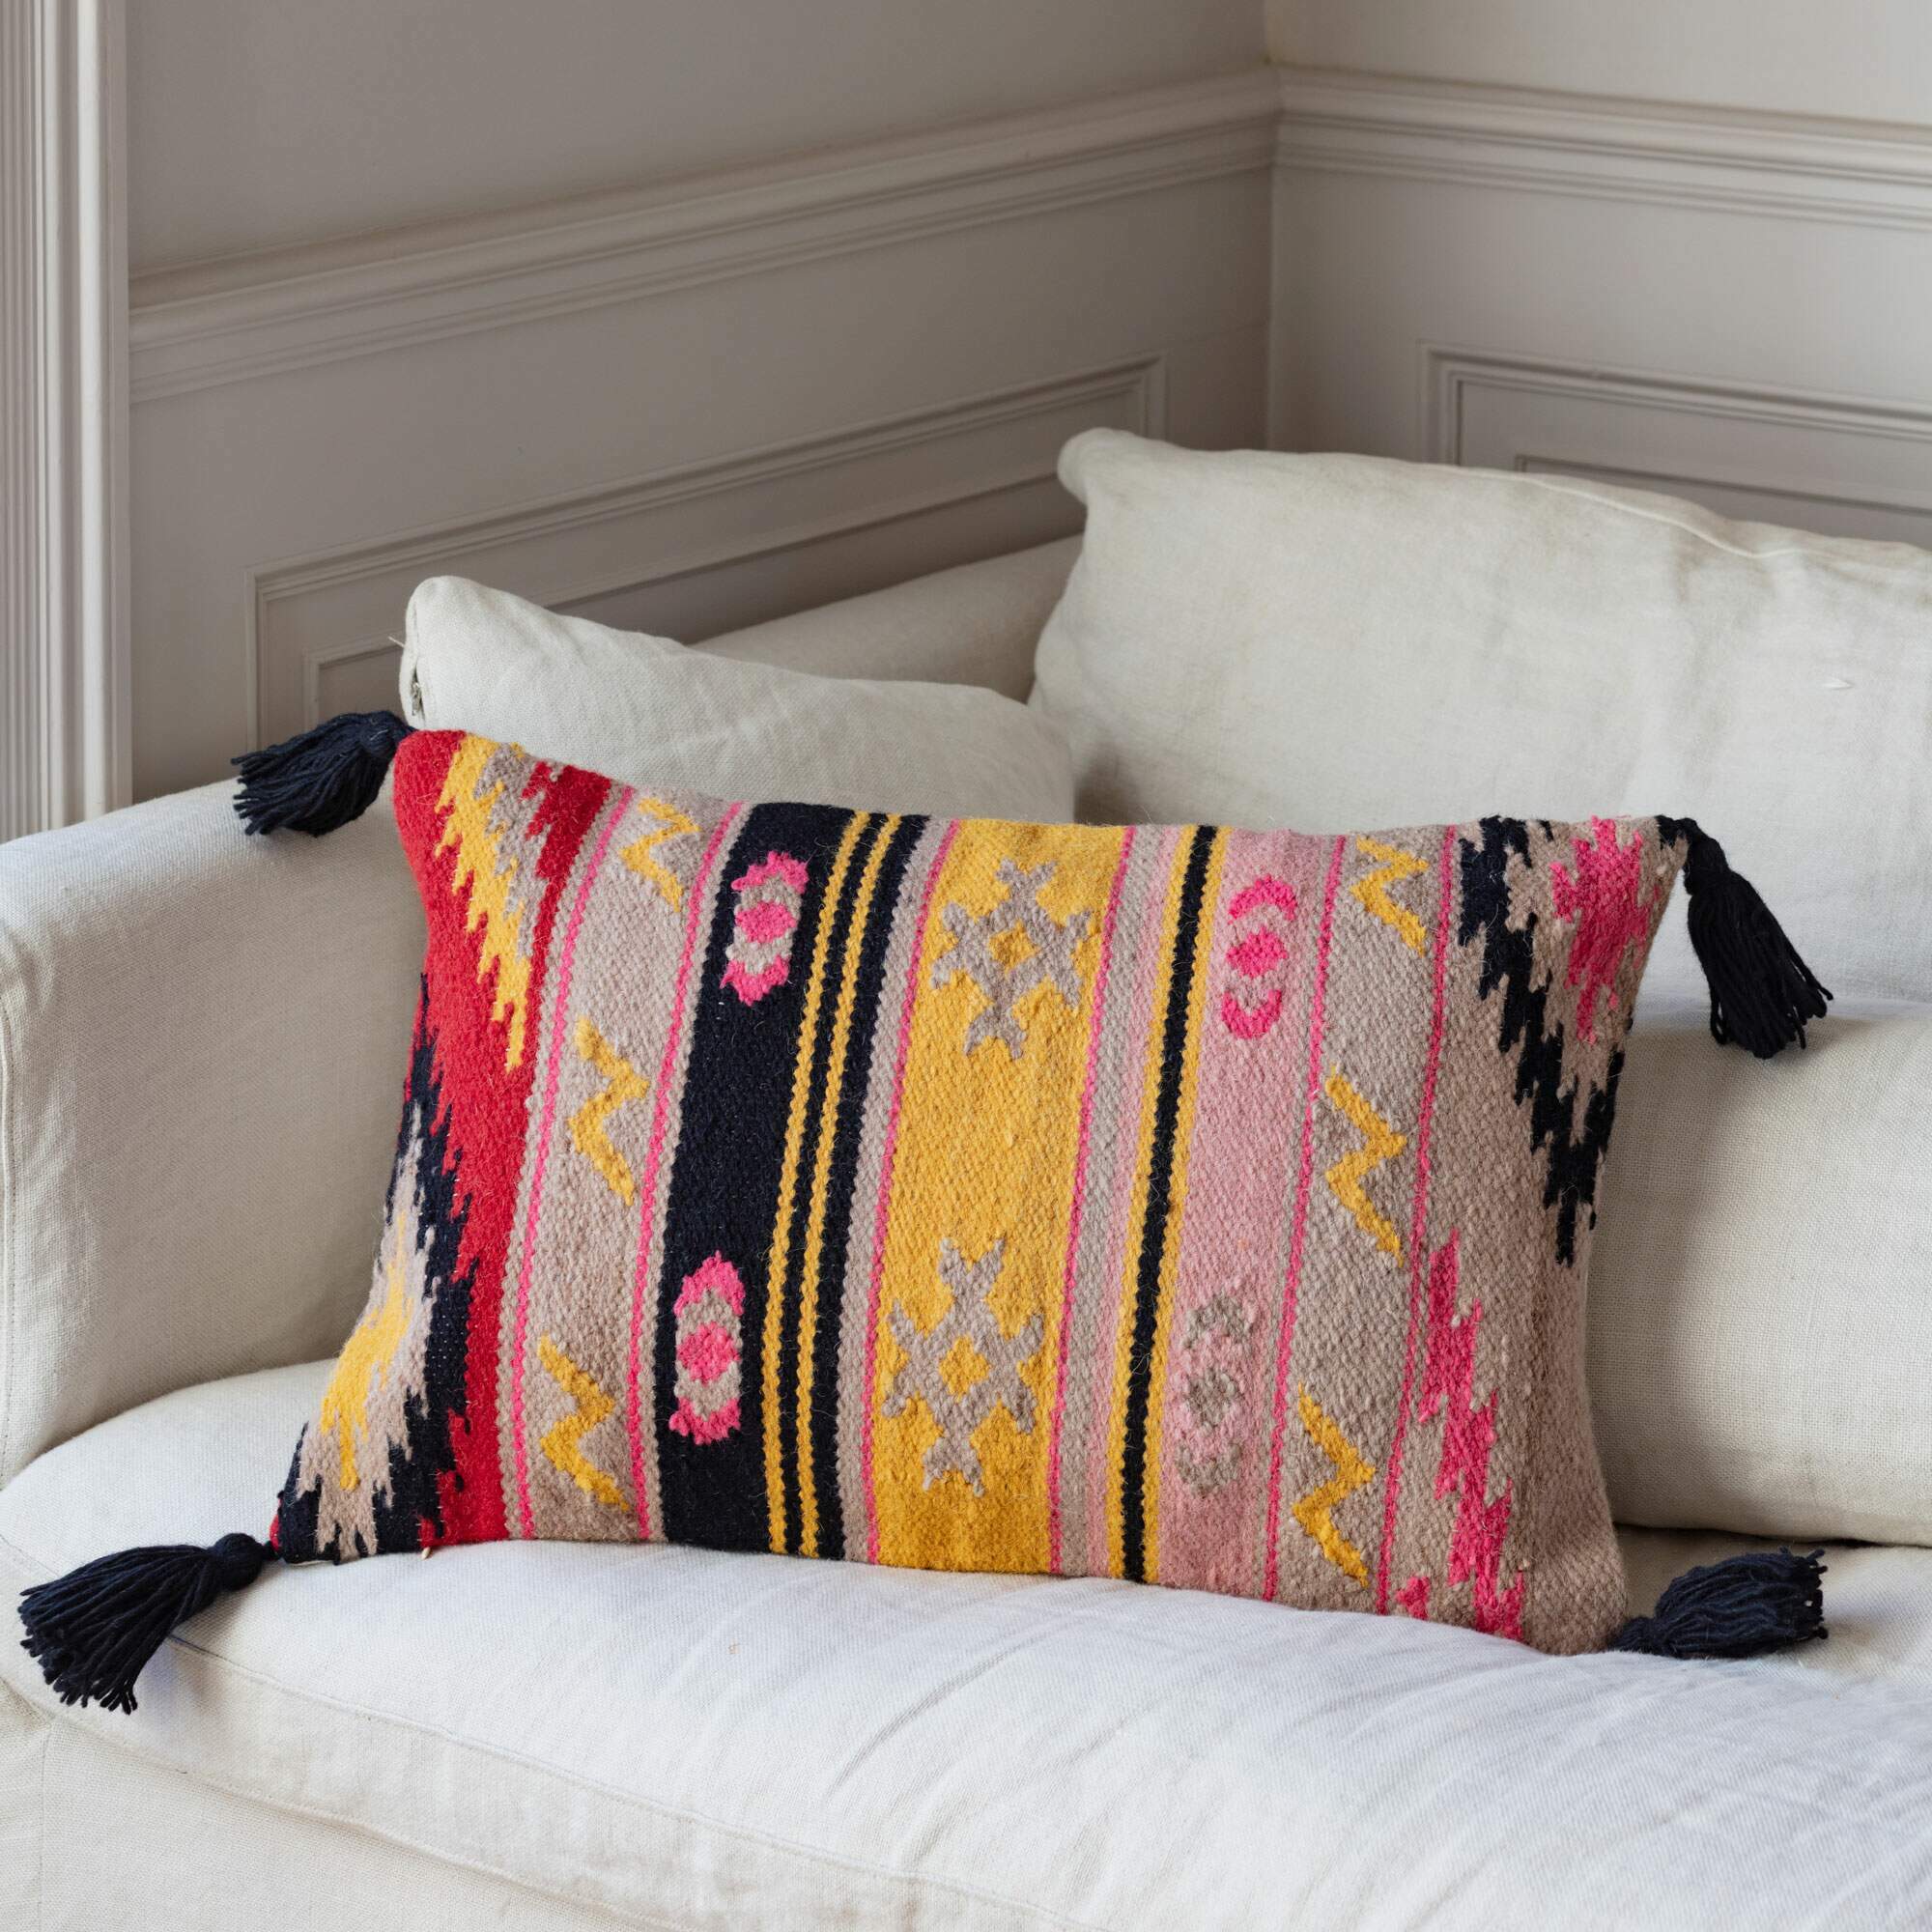 Read more about Graham and green asmee rectangular tasselled cushion